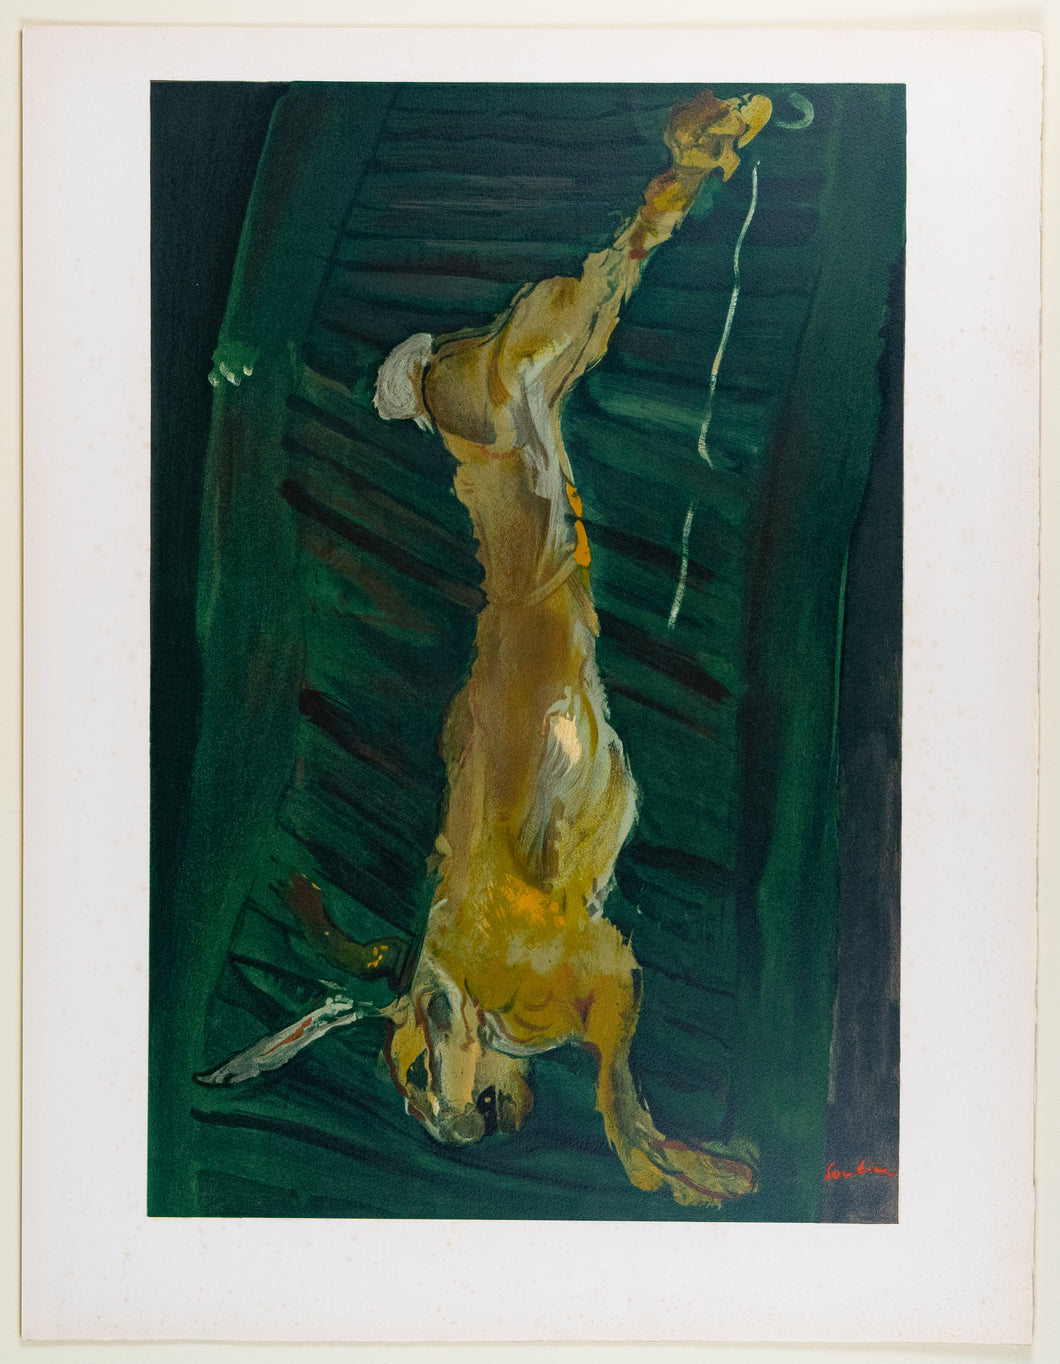 Chaïm Soutine (1893-1943) (after) -   The Hare with the Green Shutter  - Lithograph